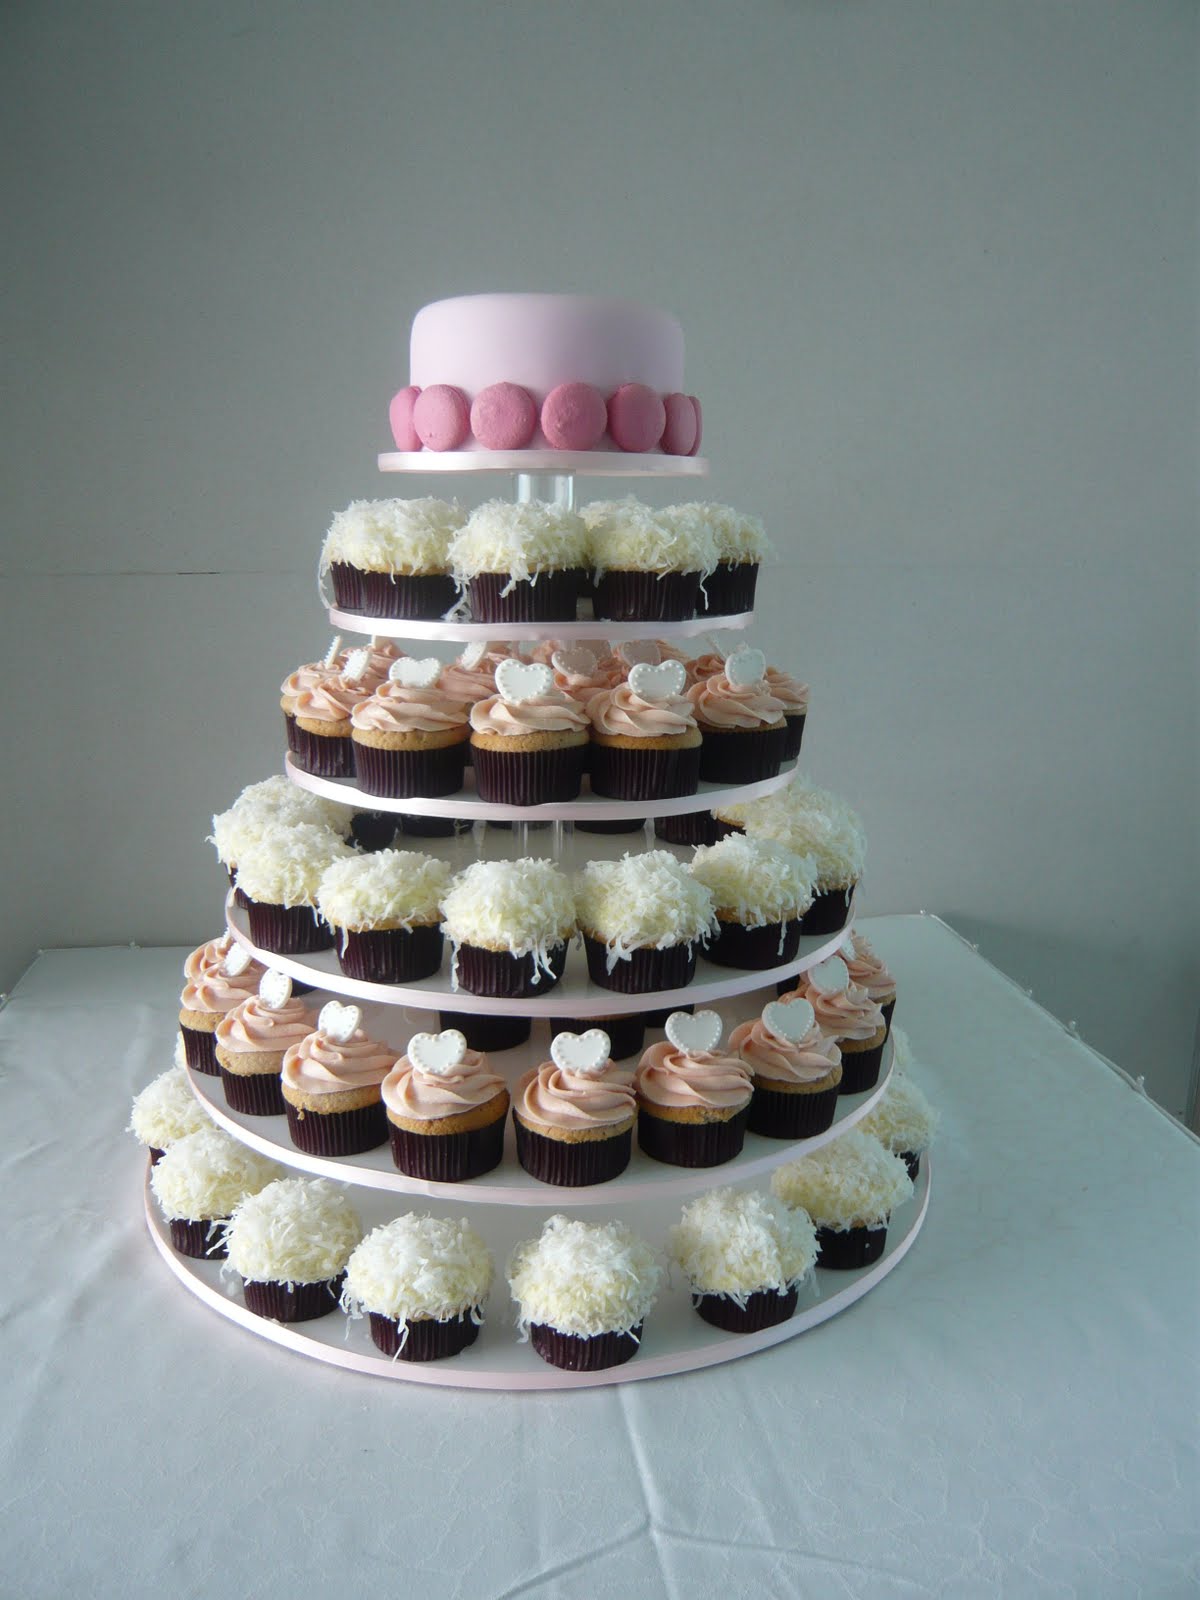 Pictures Of Cupcake Towers 10